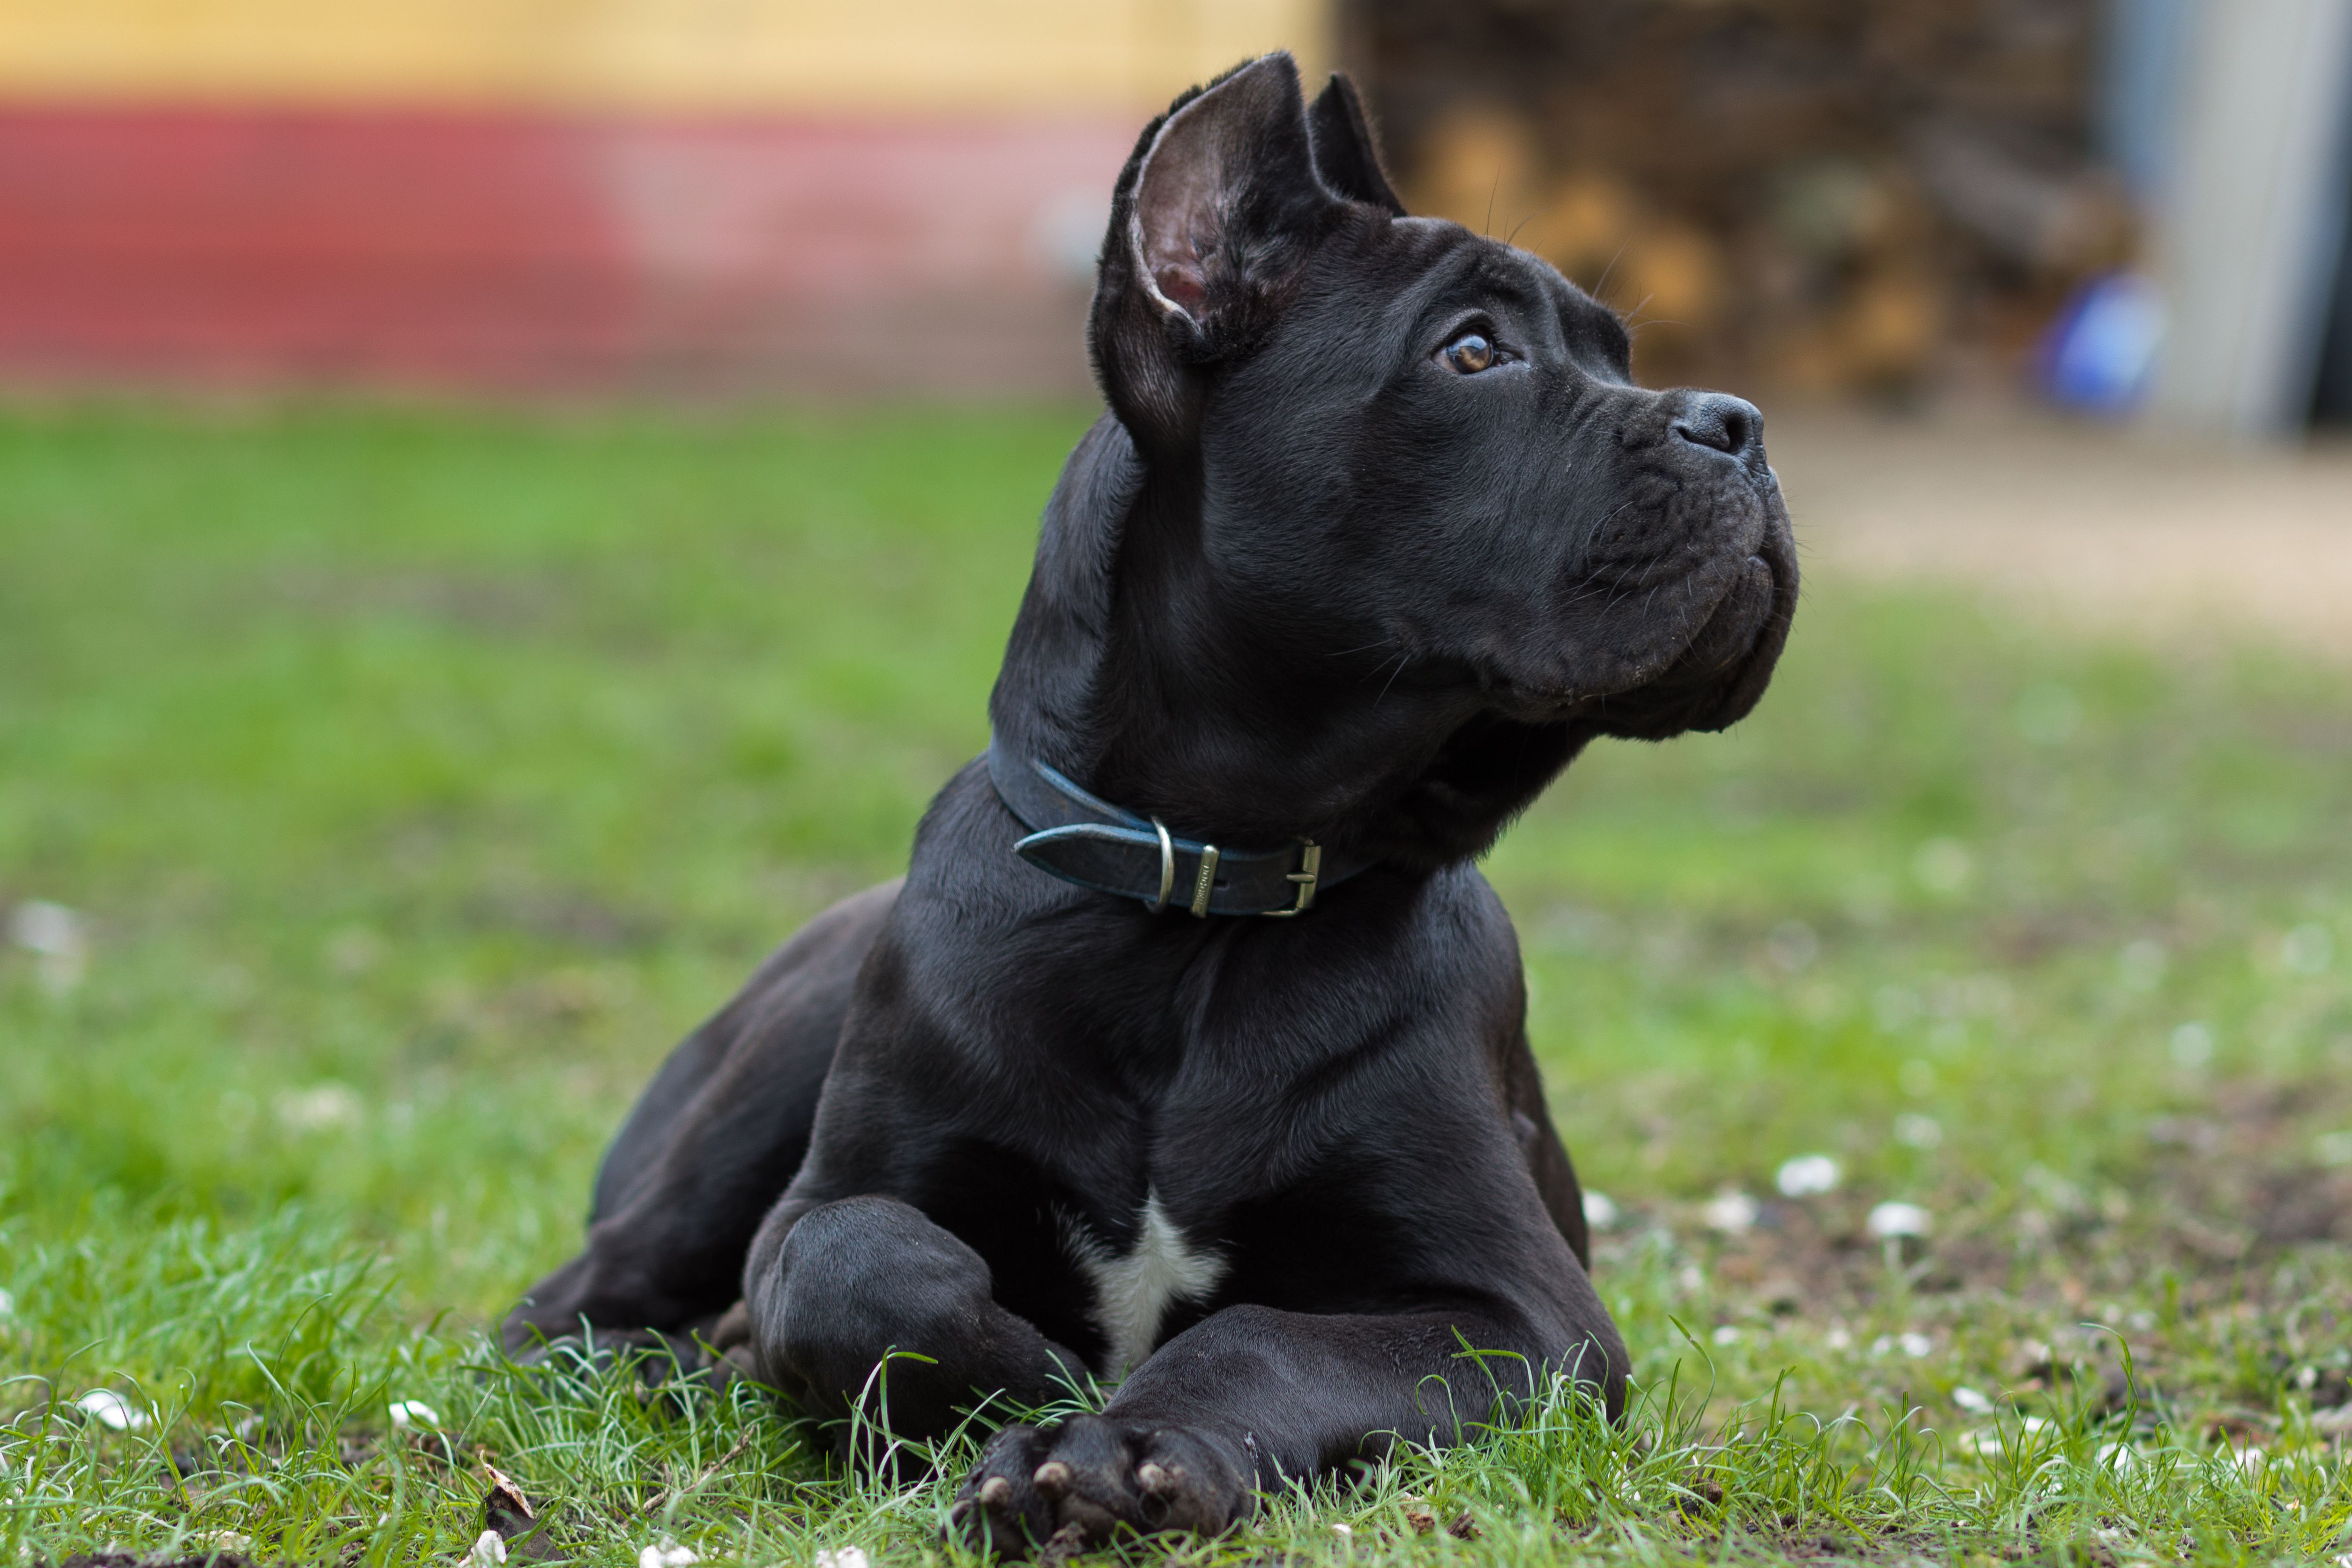 Puppy Age 3 Months Of The Cane Corso Breed Lies On The Grass